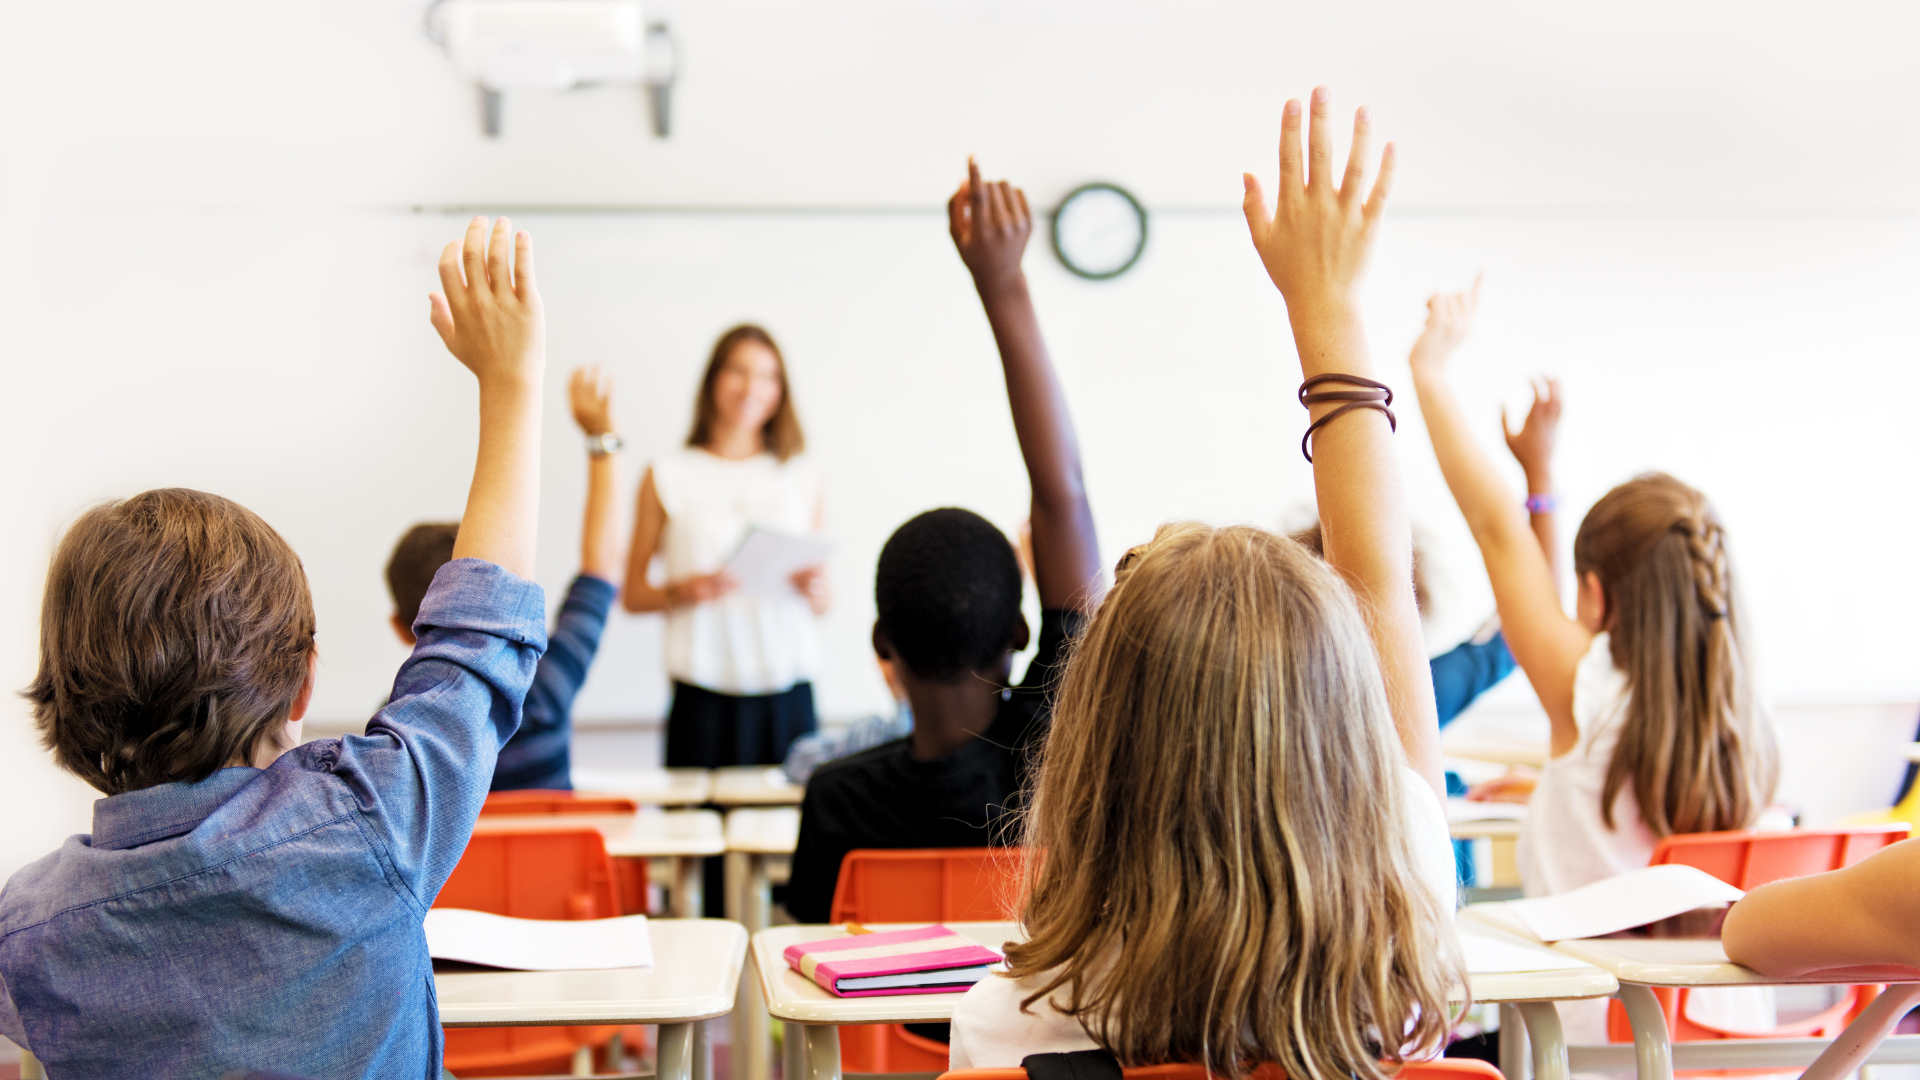 Image of students in a classroom raising their hands.